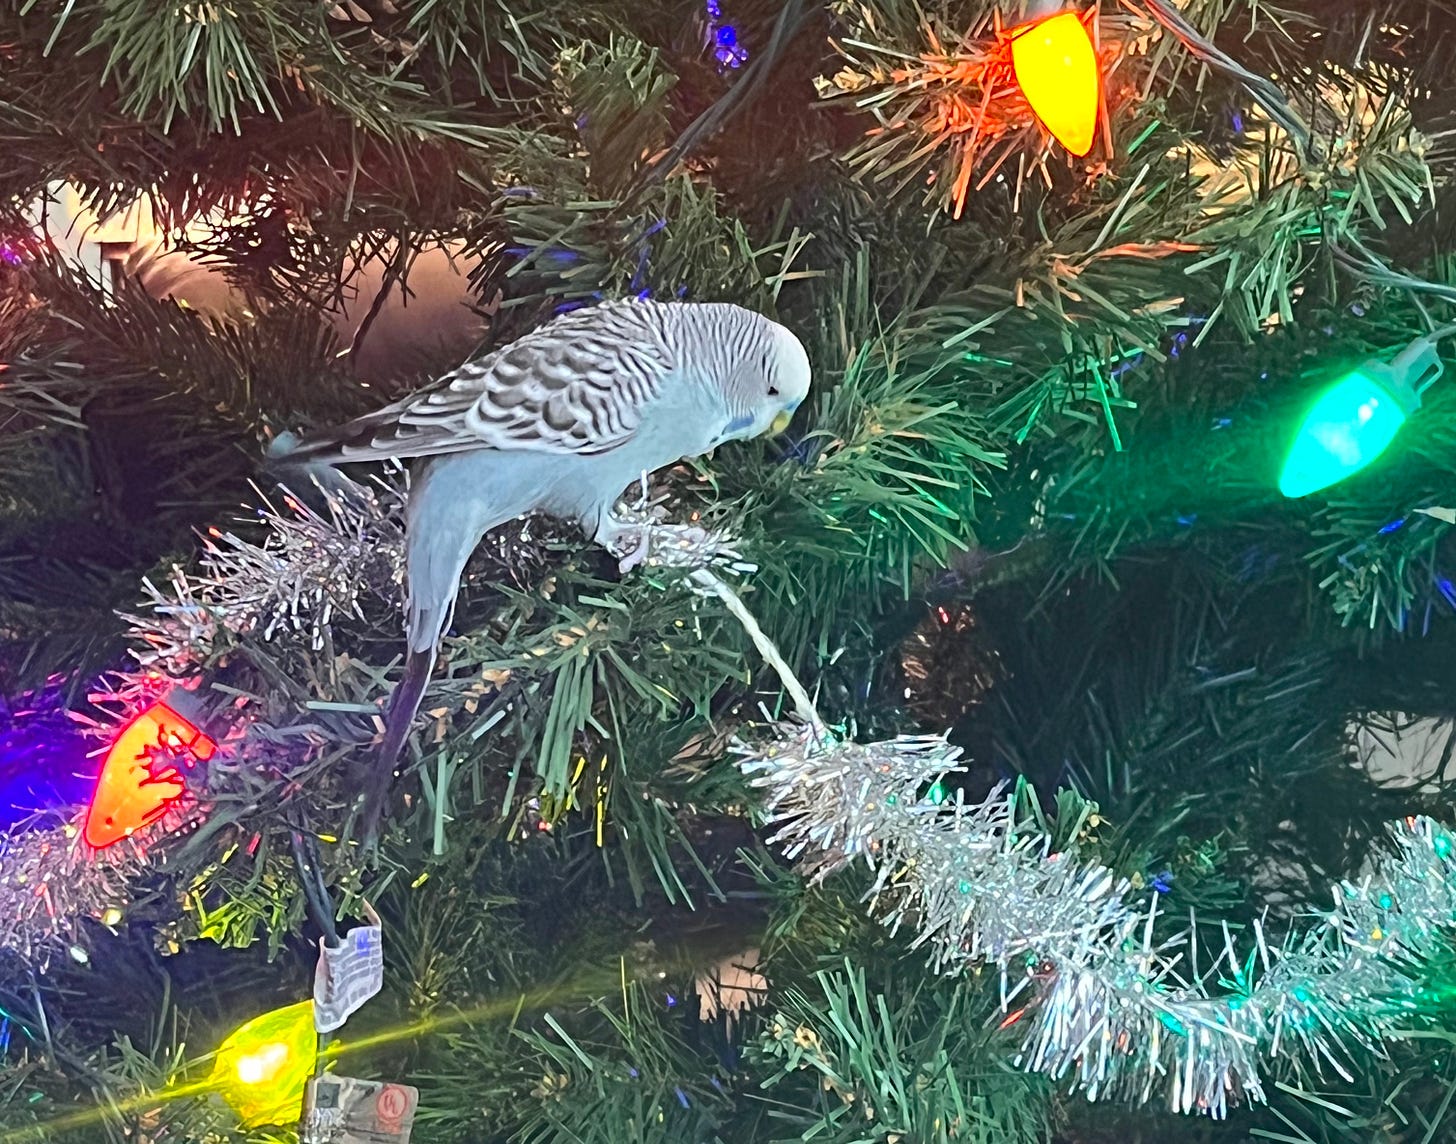 A blue budgie perched on a Christmas tree